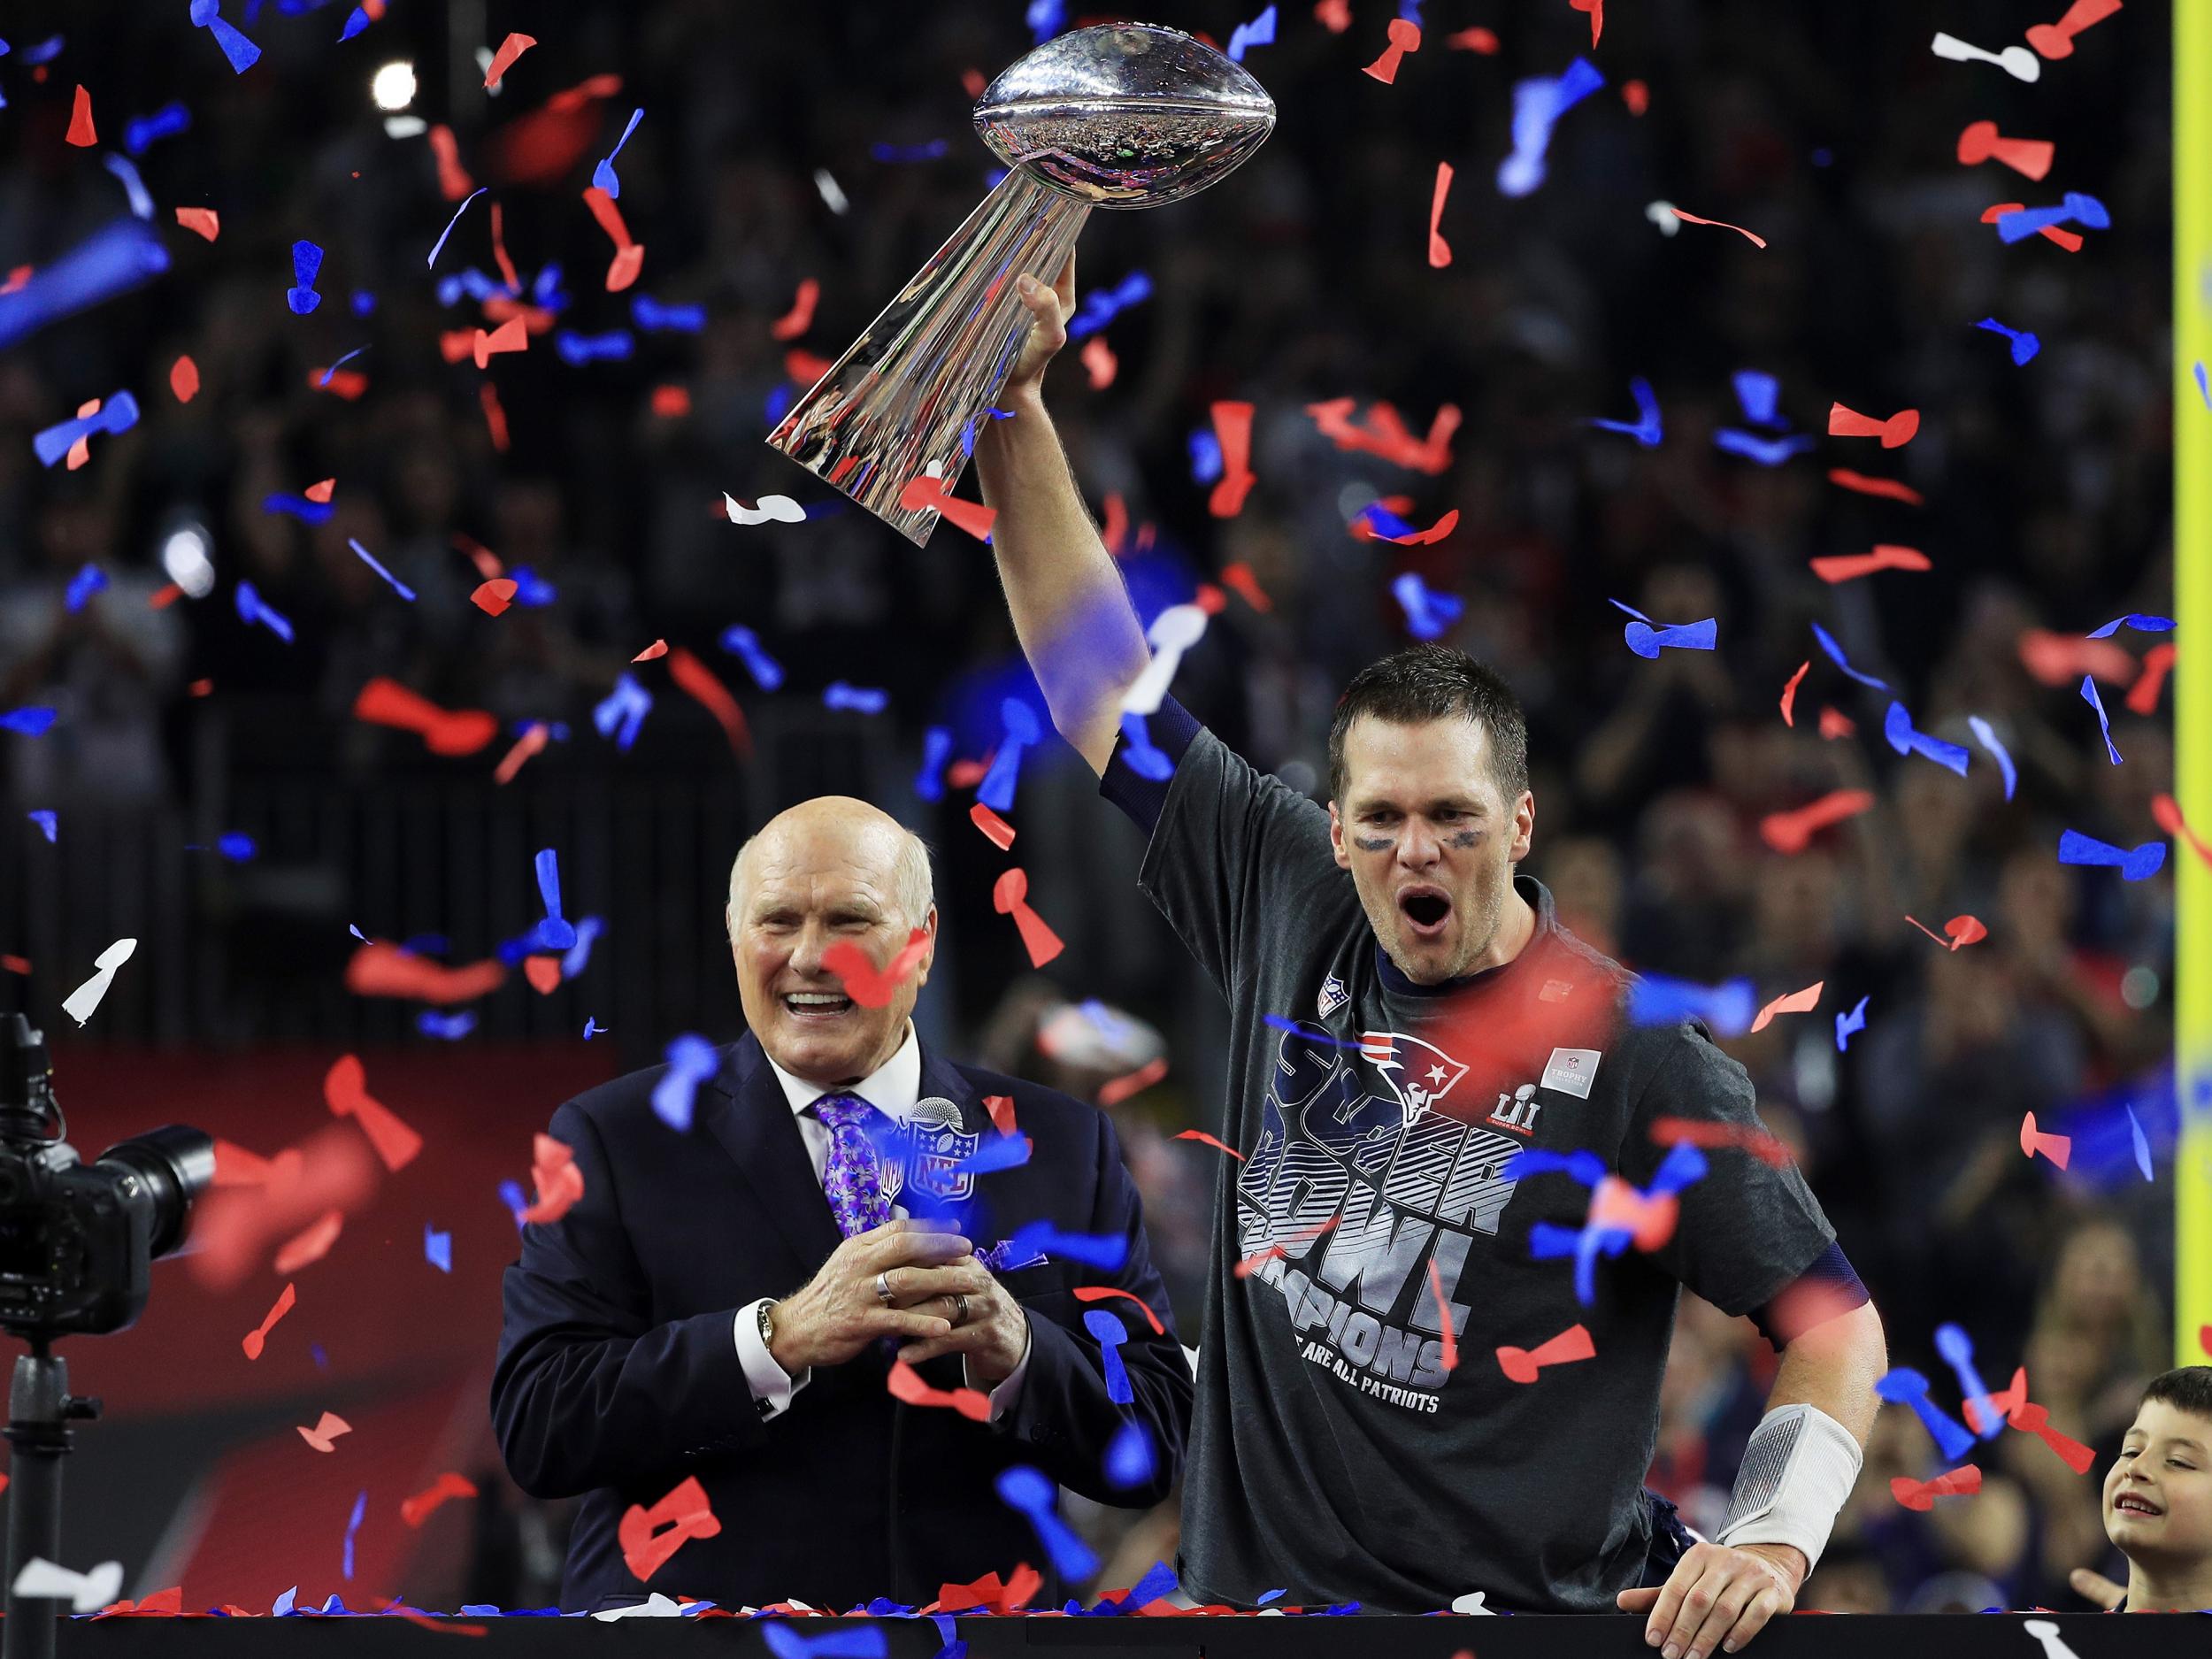 Tom Brady was picked with the 199th pick of the draft and became the greatest quarterback ever